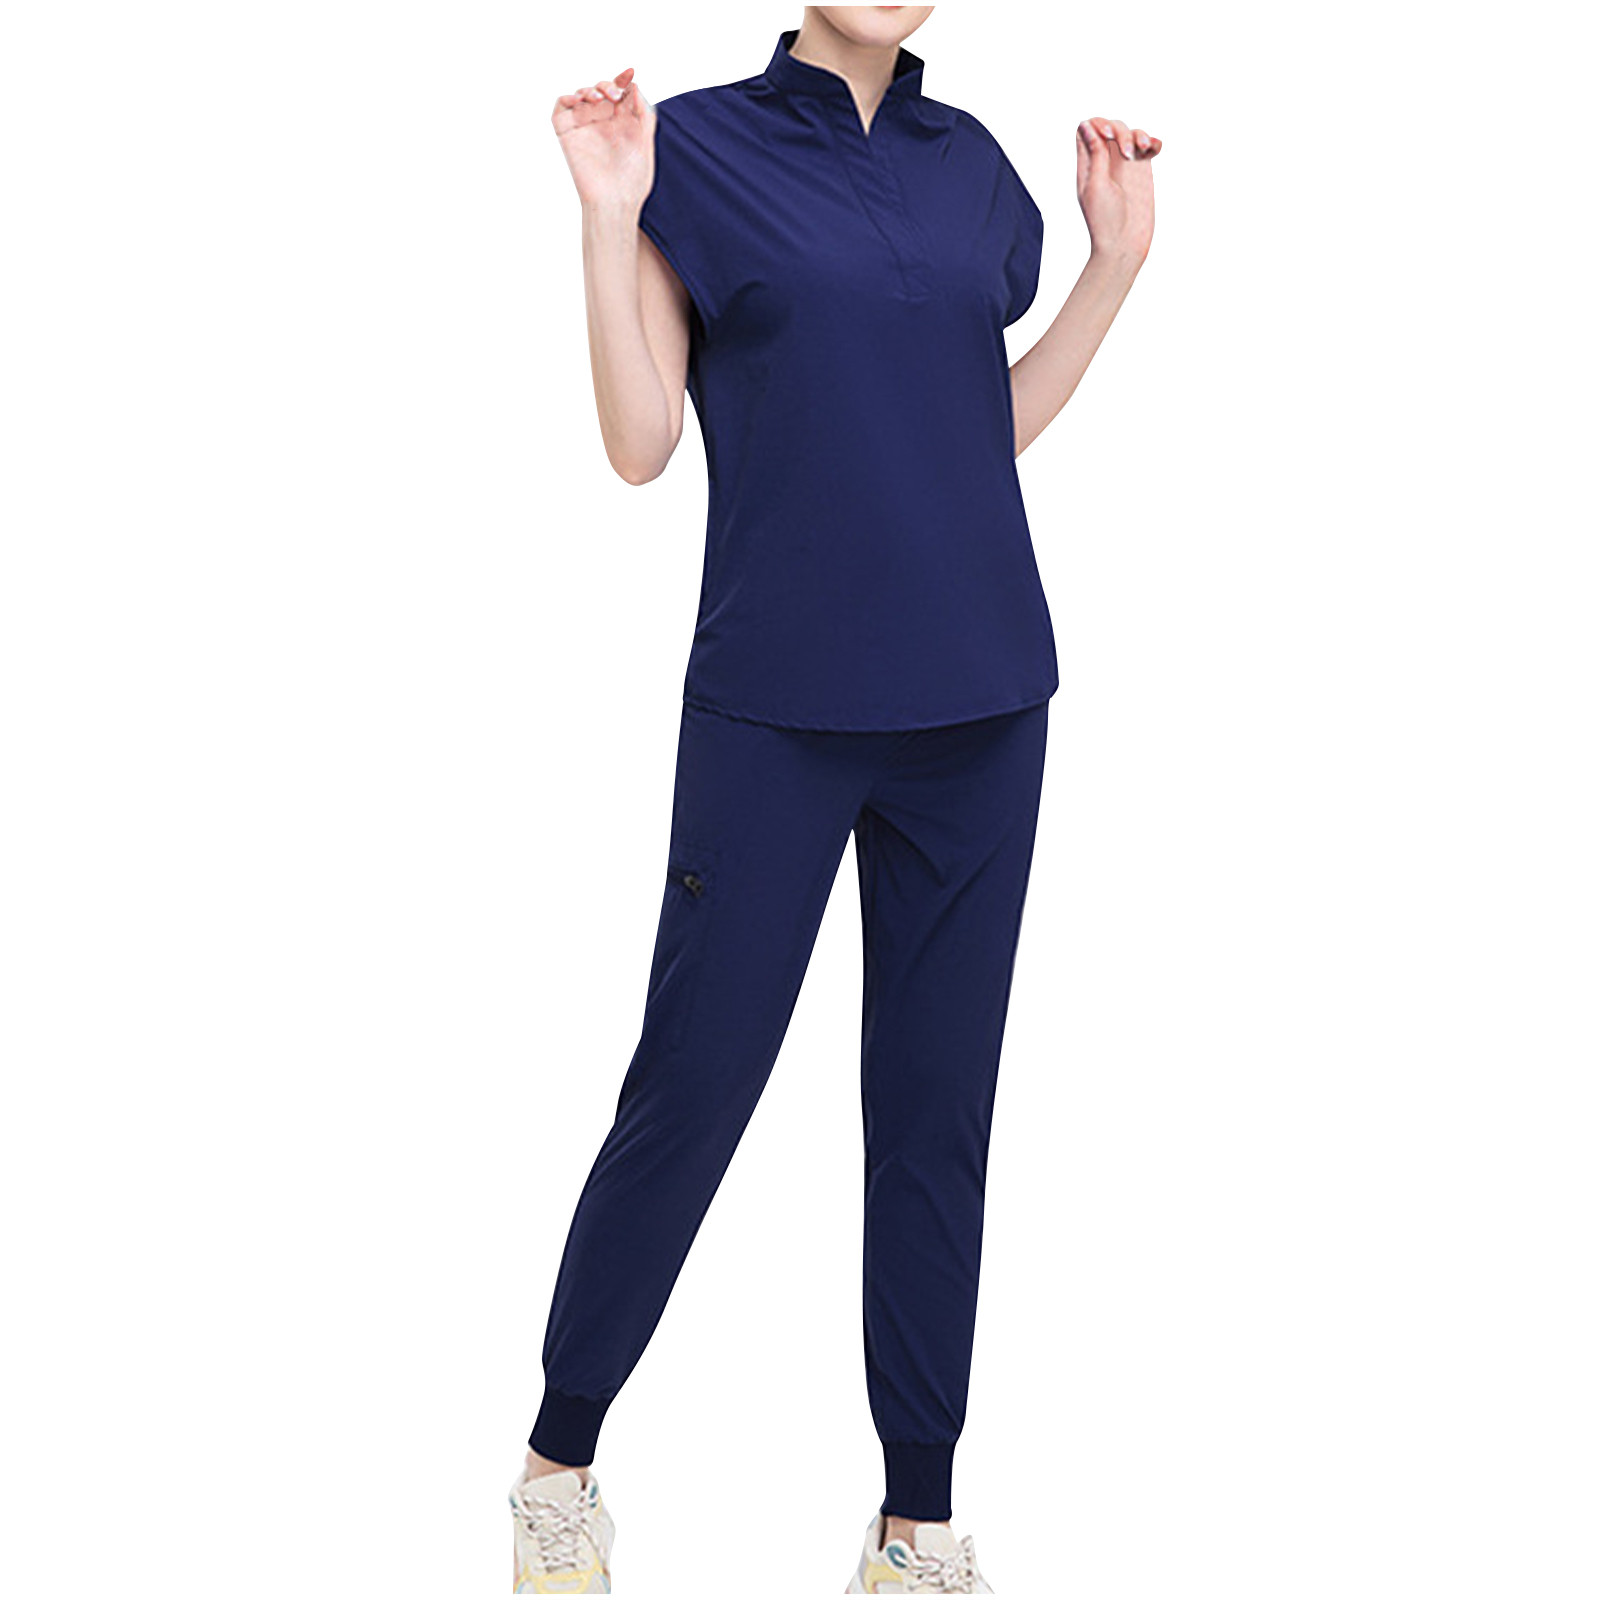 Aofany Nursing Scrub Workwear Sets for Women Solid Color Tank Top ...